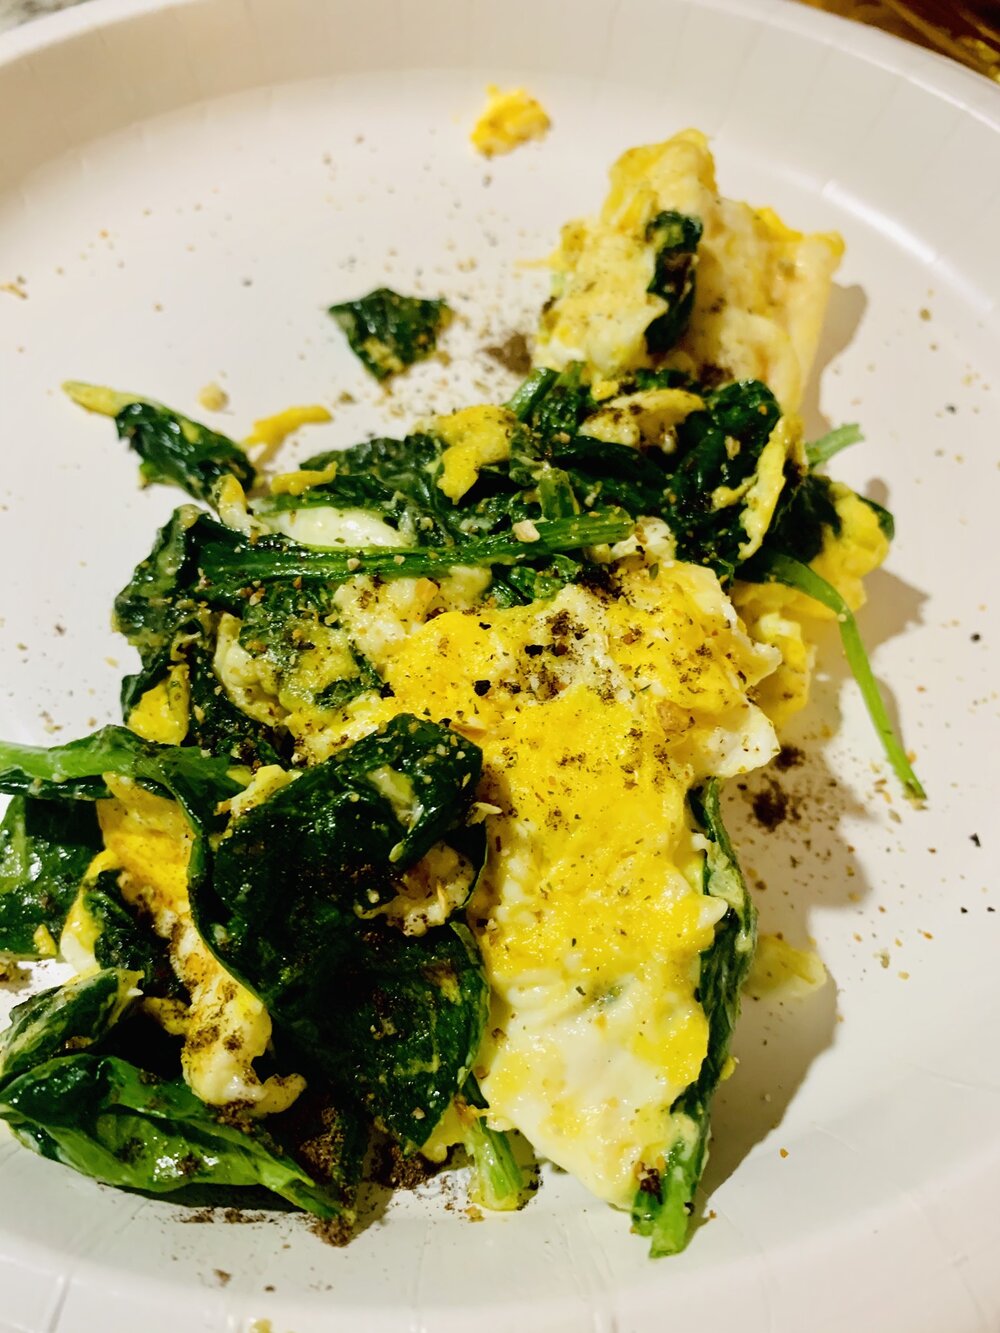 Scrambled eggs with spinach and mushrooms.jpeg